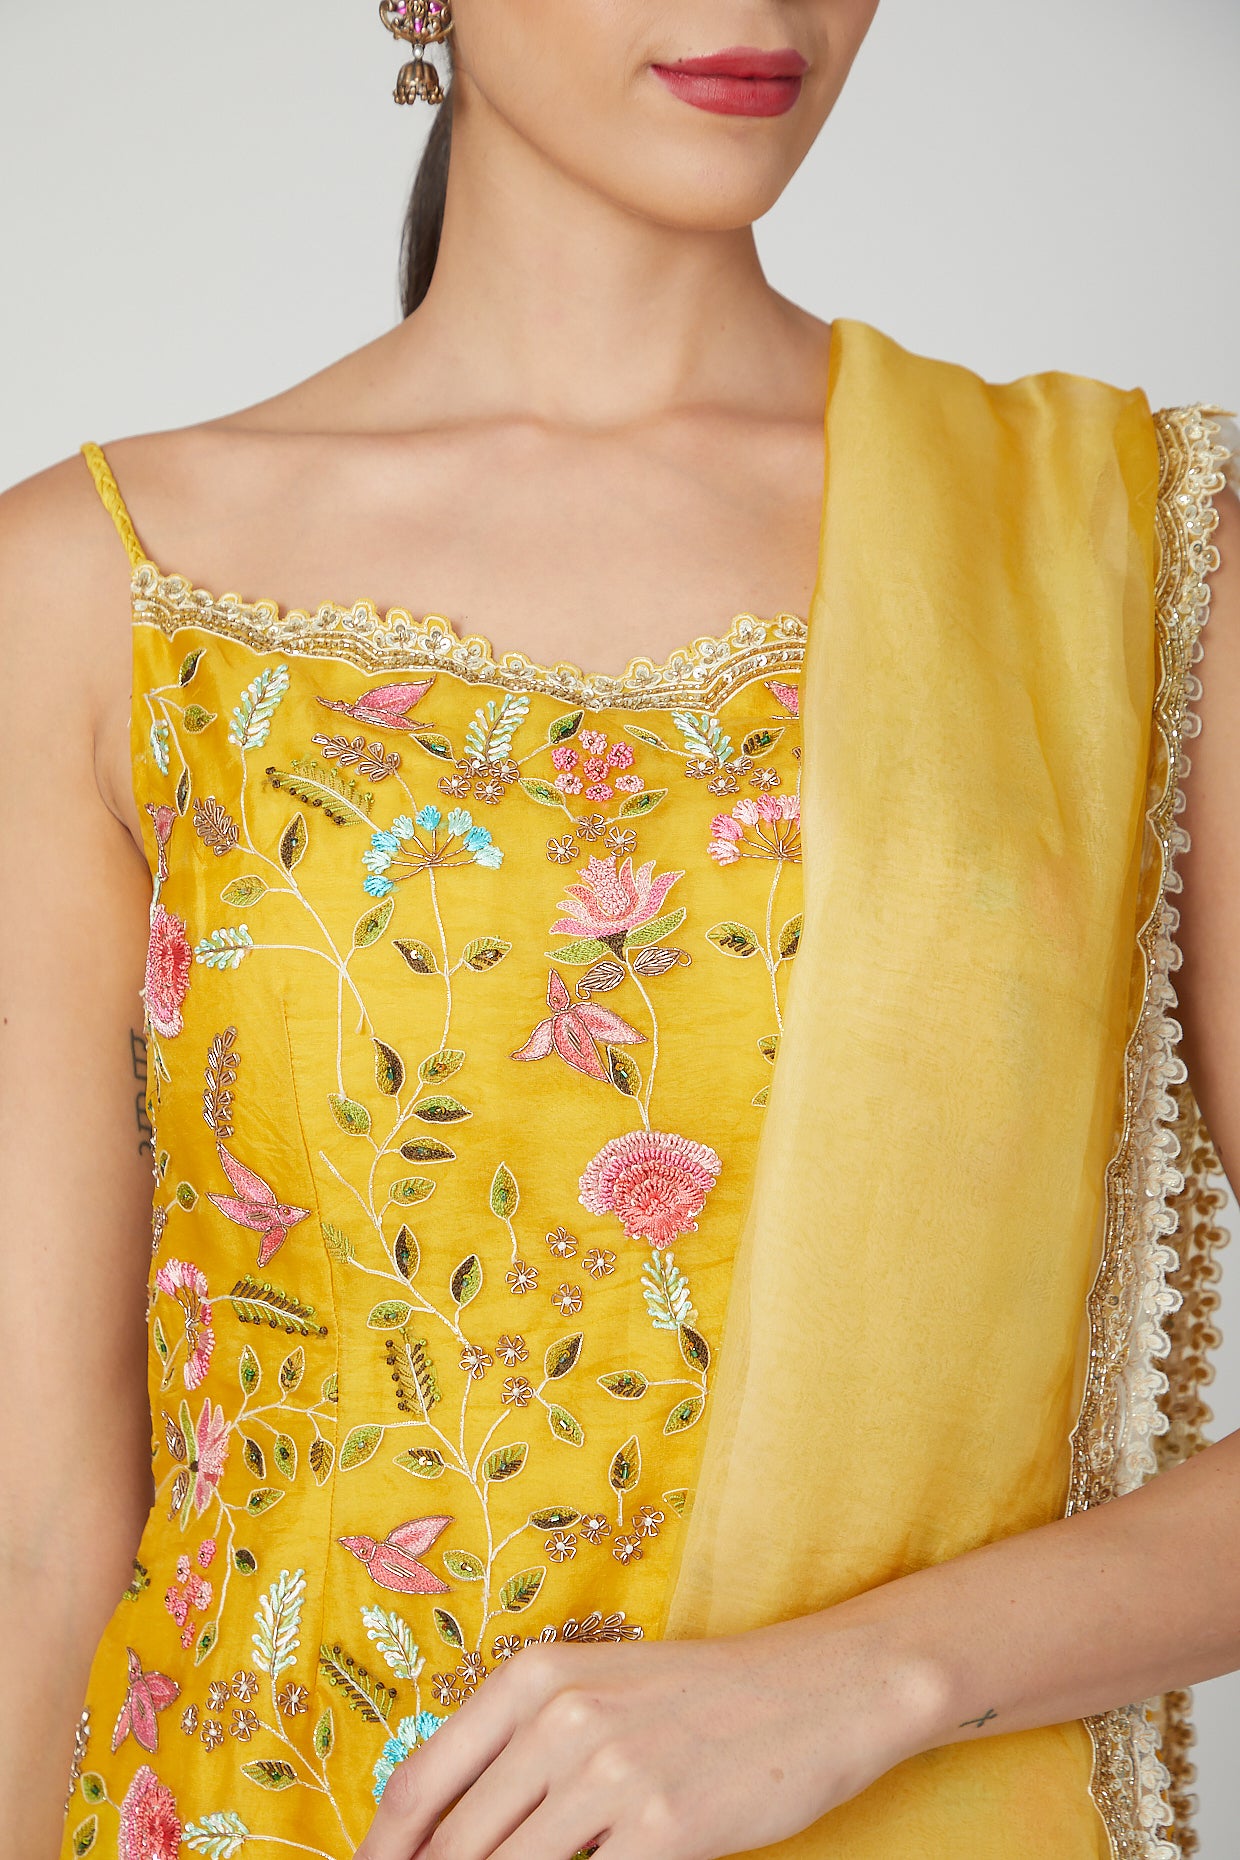 sharara dress with embroidery